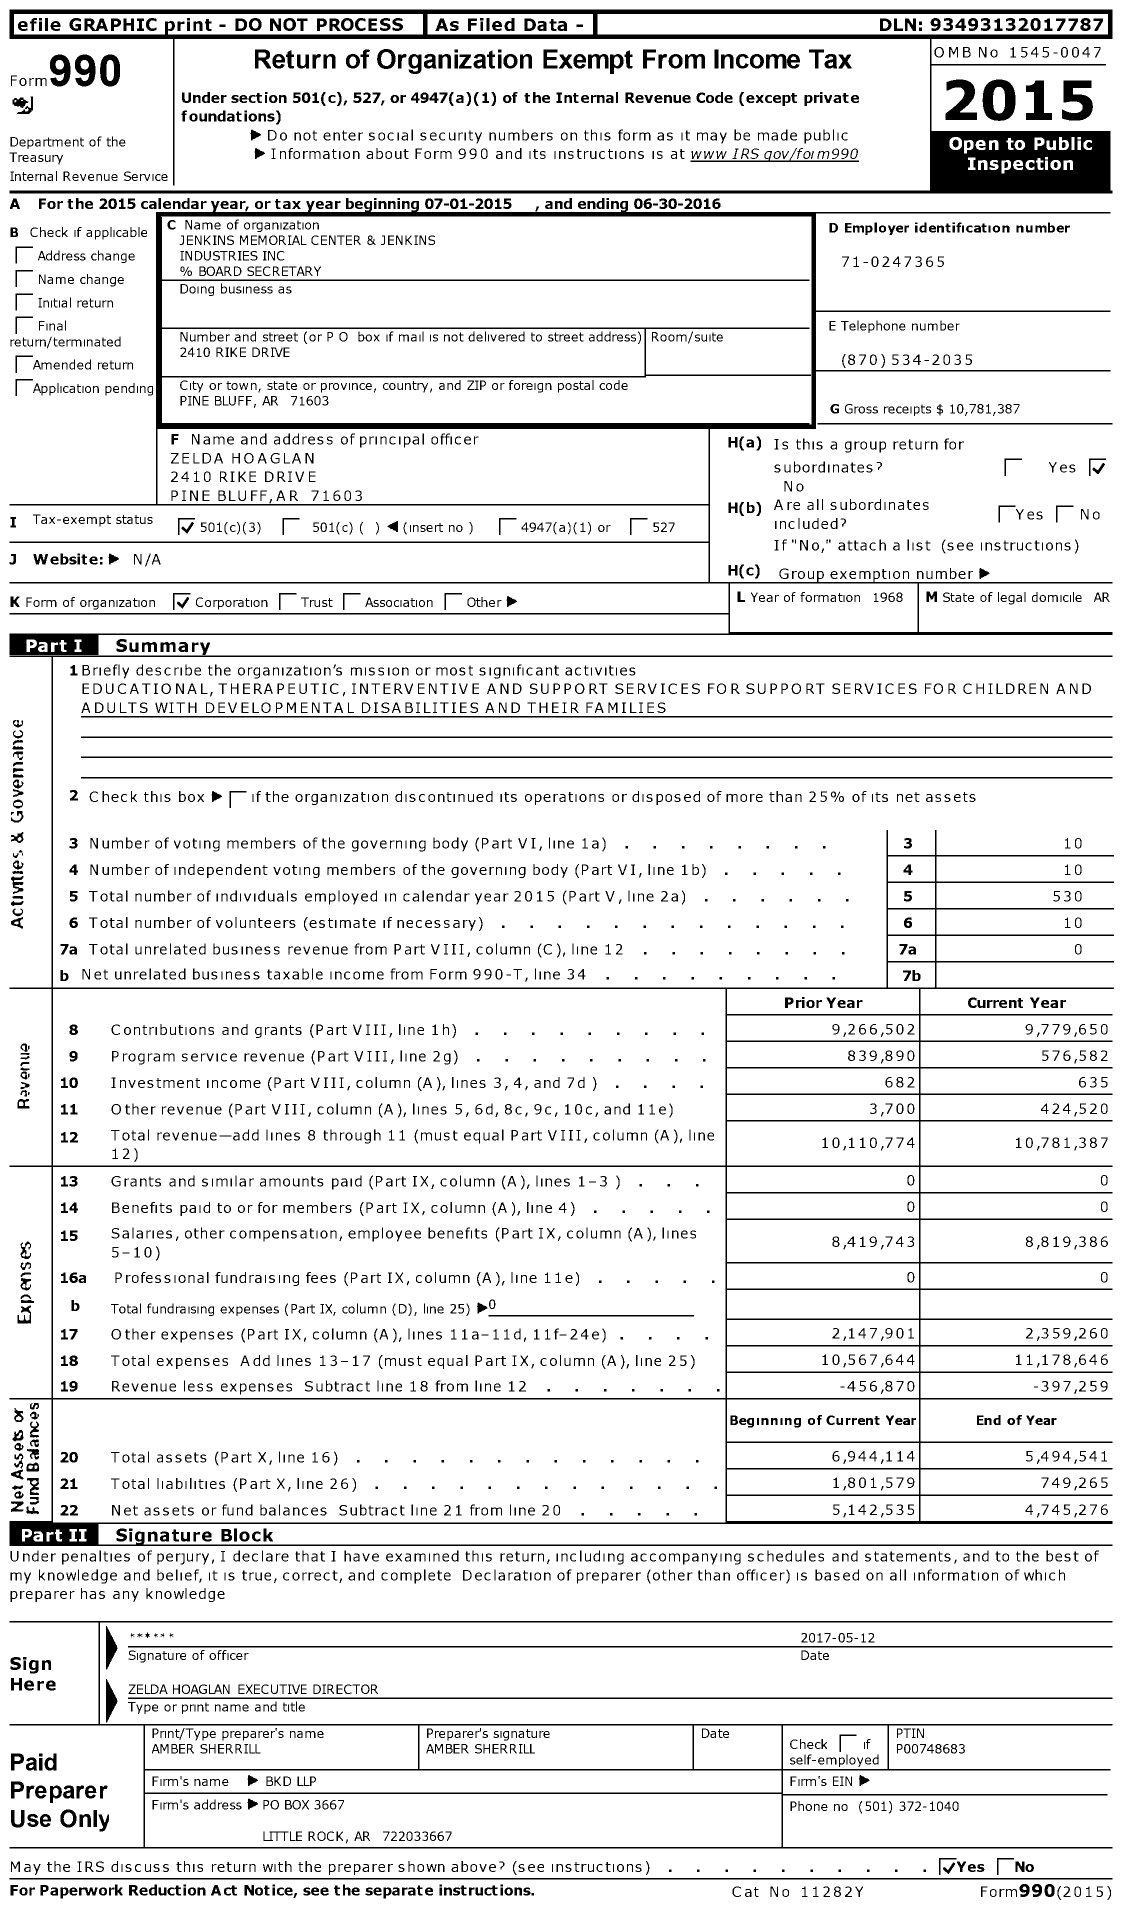 Image of first page of 2015 Form 990 for Jenkins Memorial Children's Center and Jenkins Industries